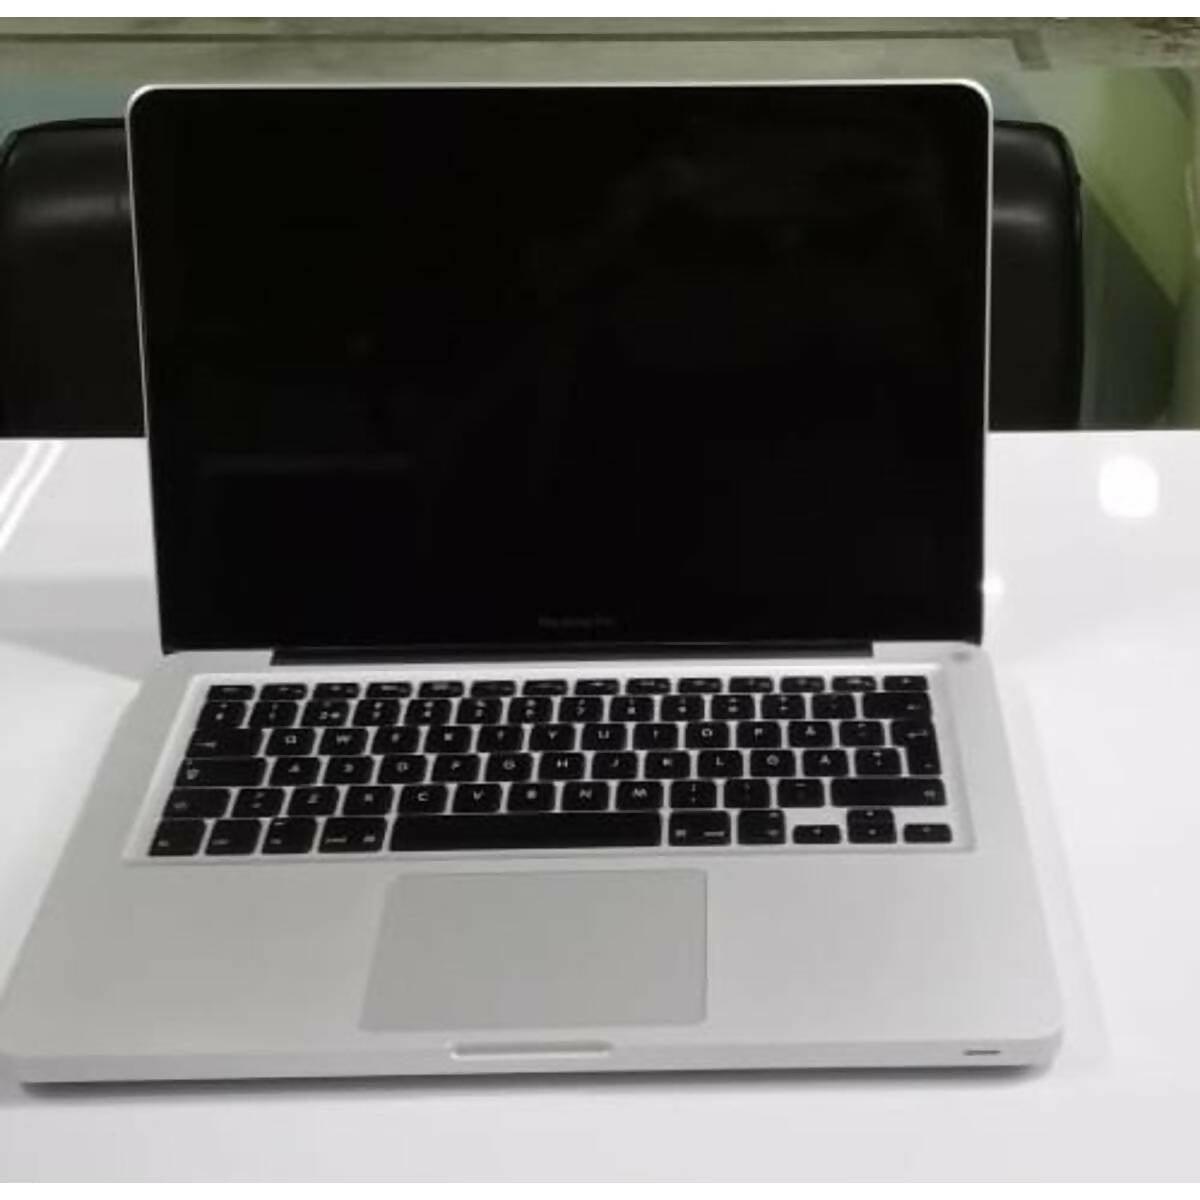 Apple MacBook Pro 2012 256GB SSD Storage 4GB RAM 2.5GHz Dual-Core Core i5 Mid 2012 13.3-inch LED Display Dual Operating system Window and macOS Silver - ValueBox